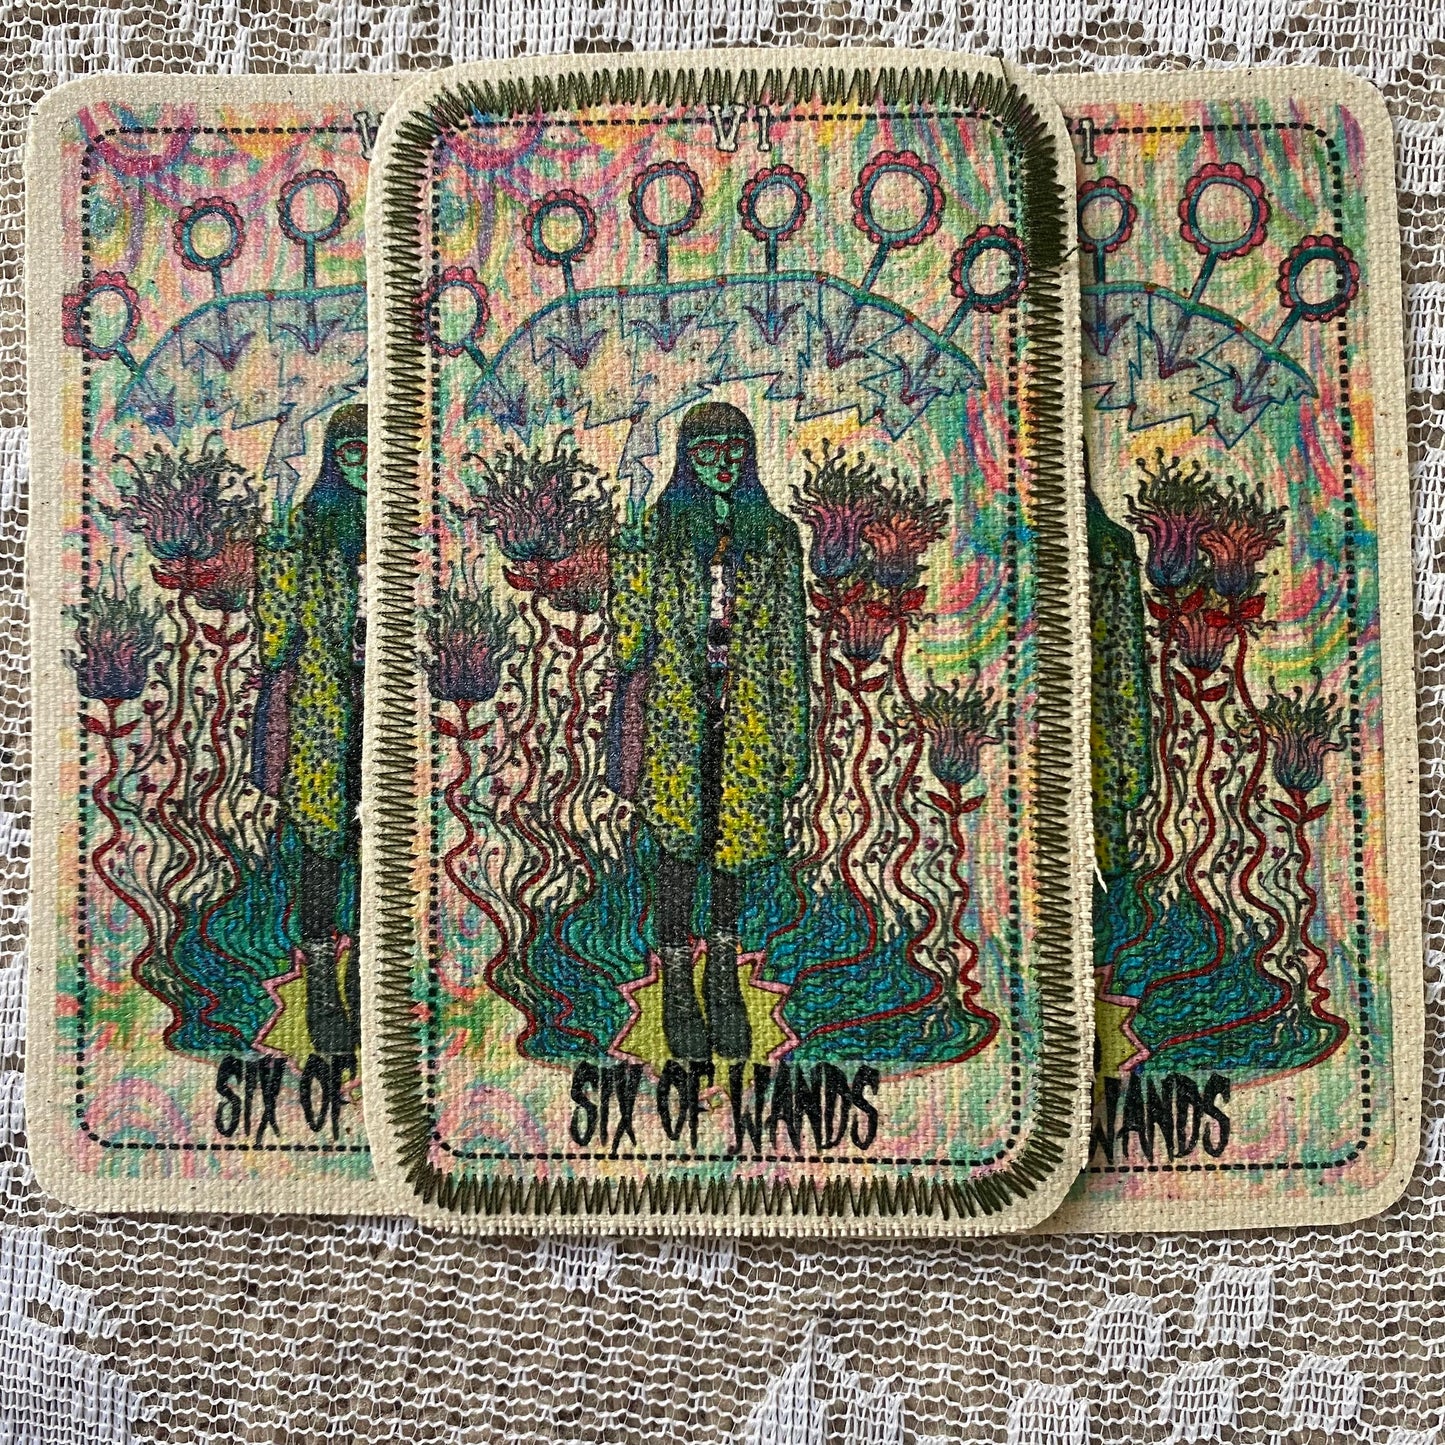 Six of Wands Canvas Patch